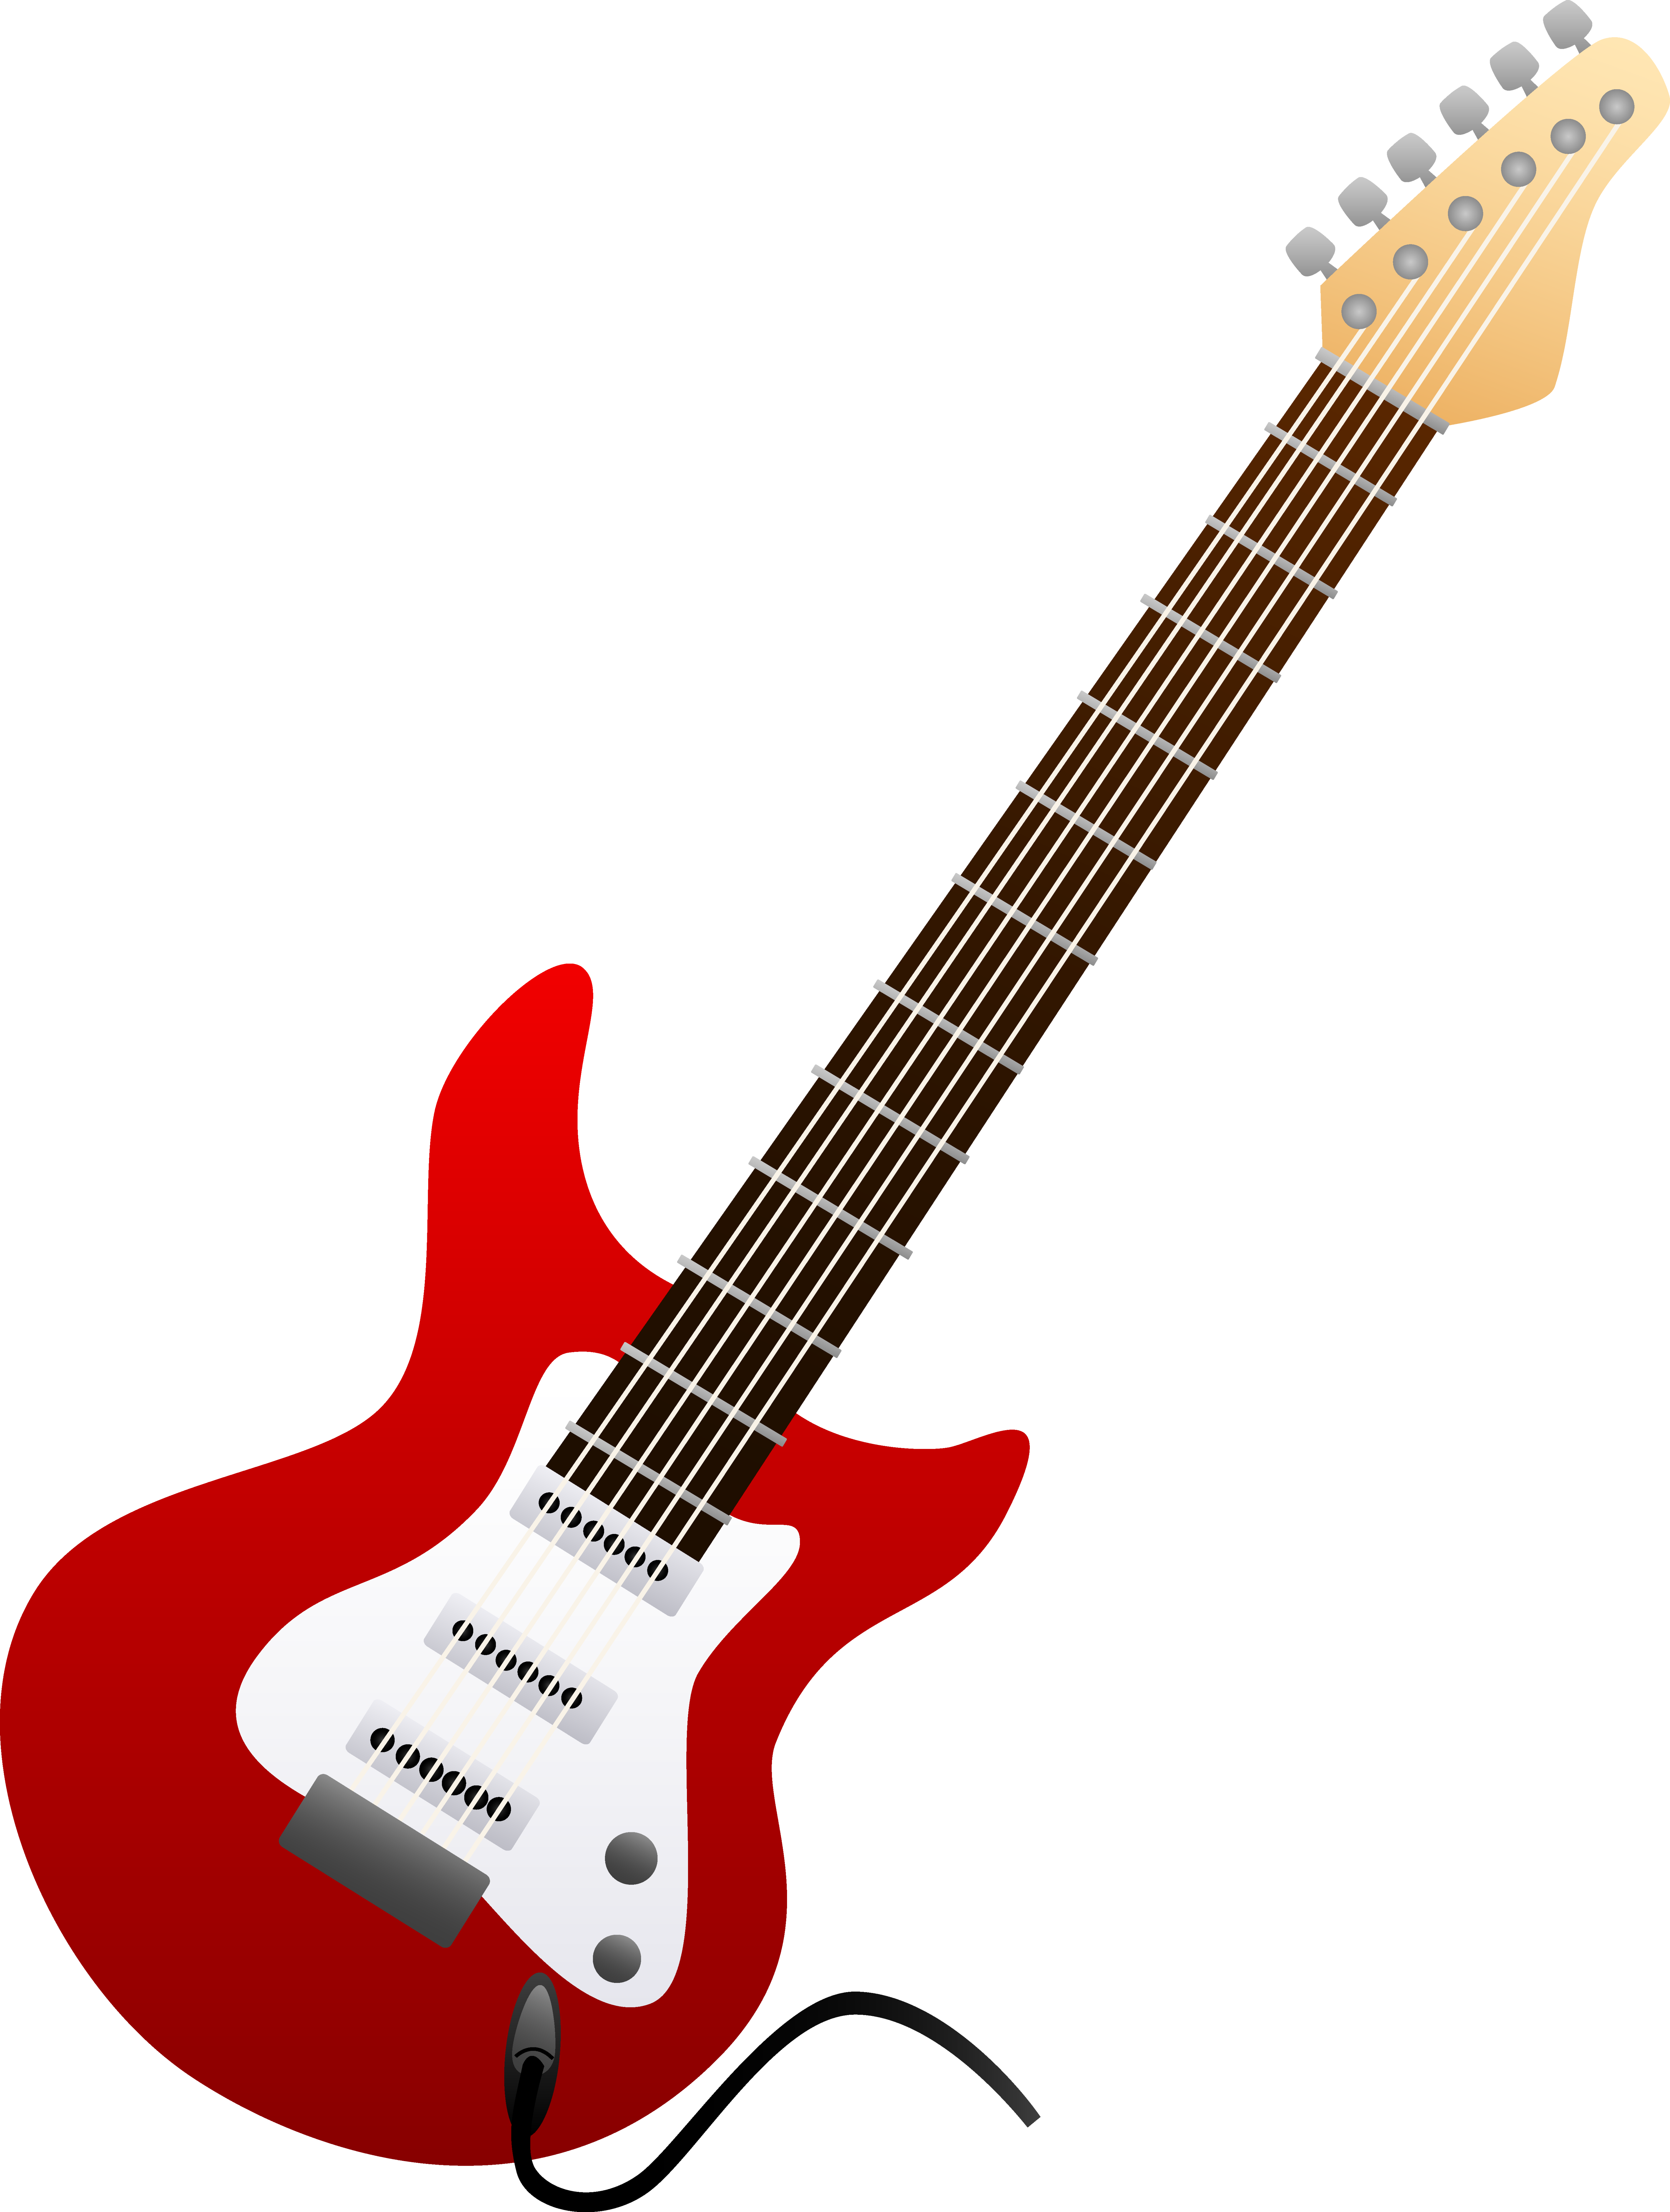 Guitar Clip Art Images Clipart - Free to use Clip Art Resource